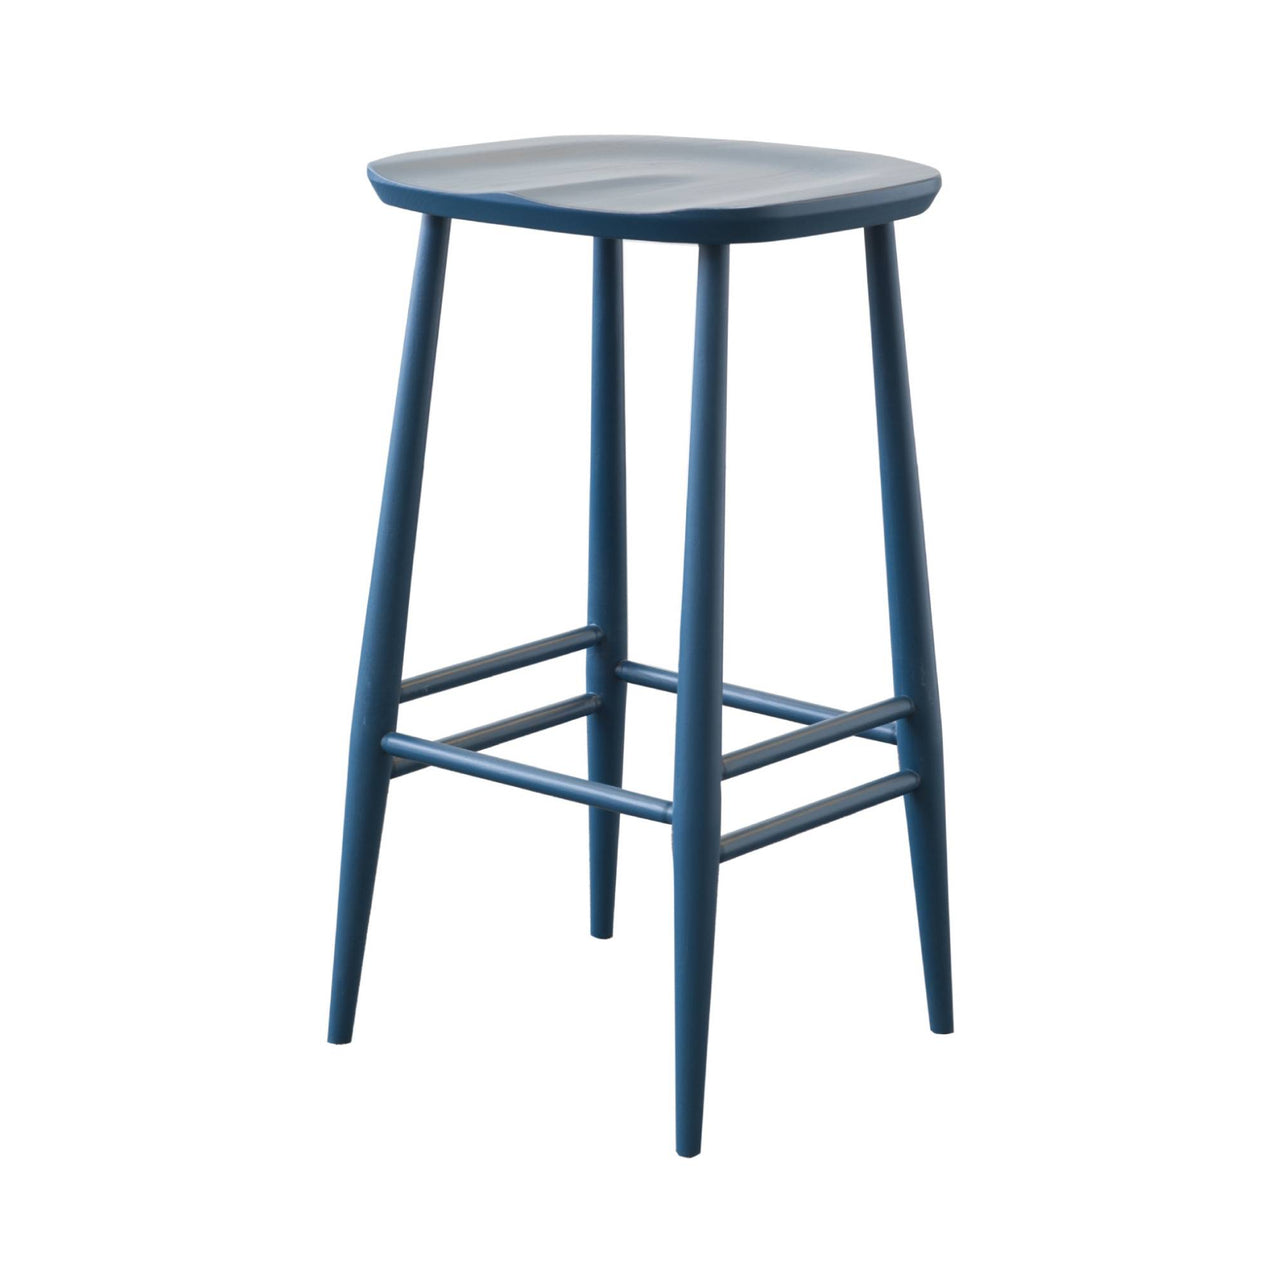 Originals Utility Bar + Counter Stool: Bar + Stained Oceanic